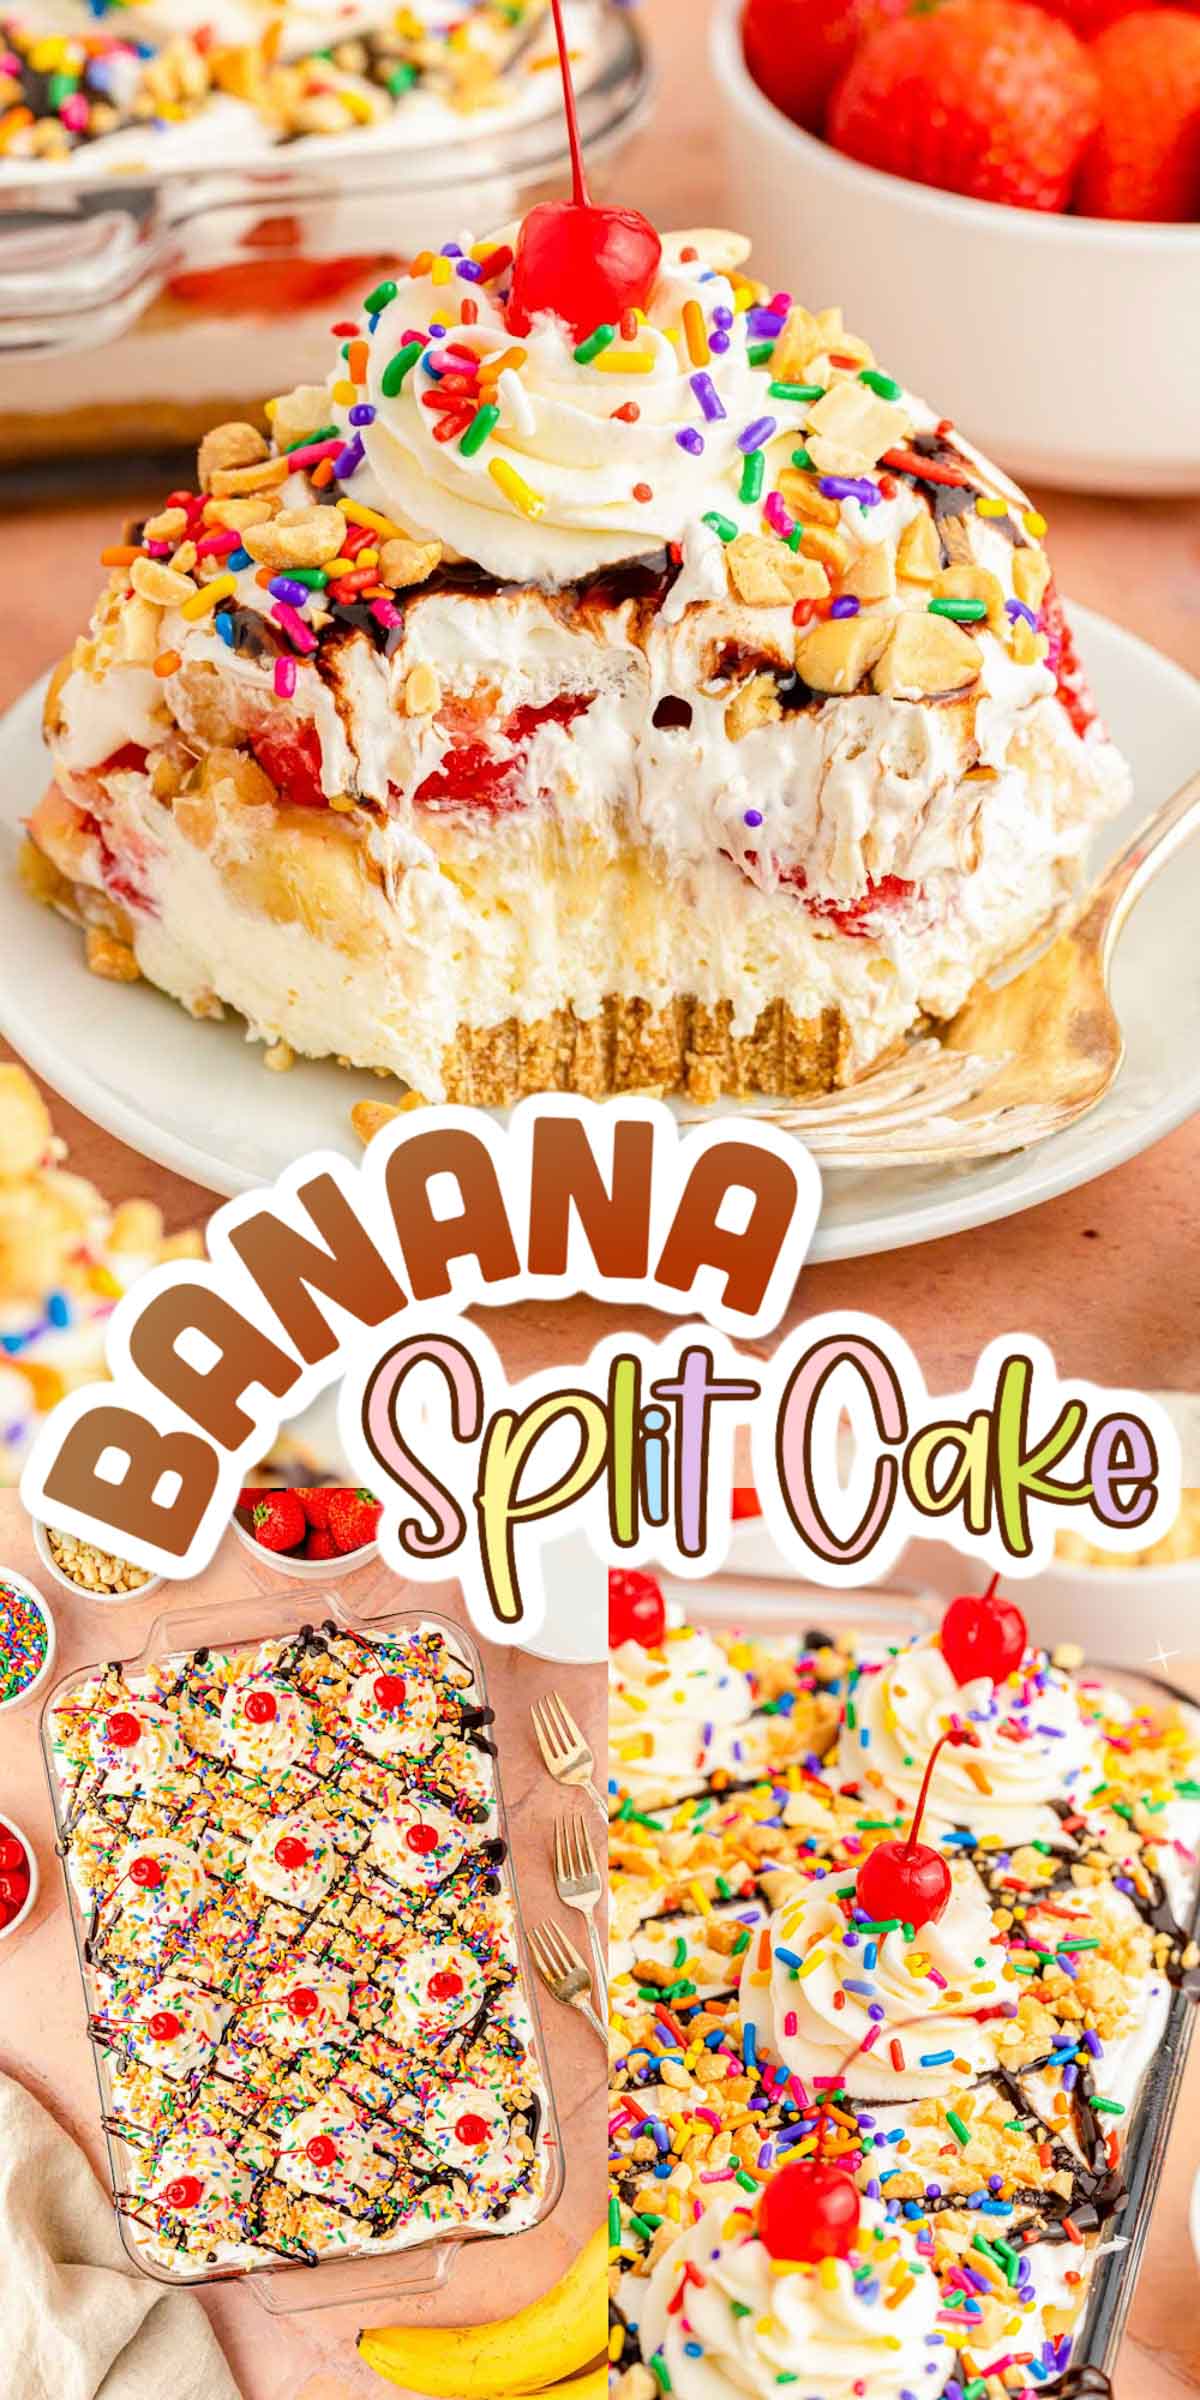 This recipe for Banana Split Cake is so easy to make! It's a fun chilled dessert that's piled with toppings like sliced bananas, strawberries, whipped cream, cherries, and sprinkles! It takes just 20 minutes to prep before chilling in the fridge! via @sugarandsoulco